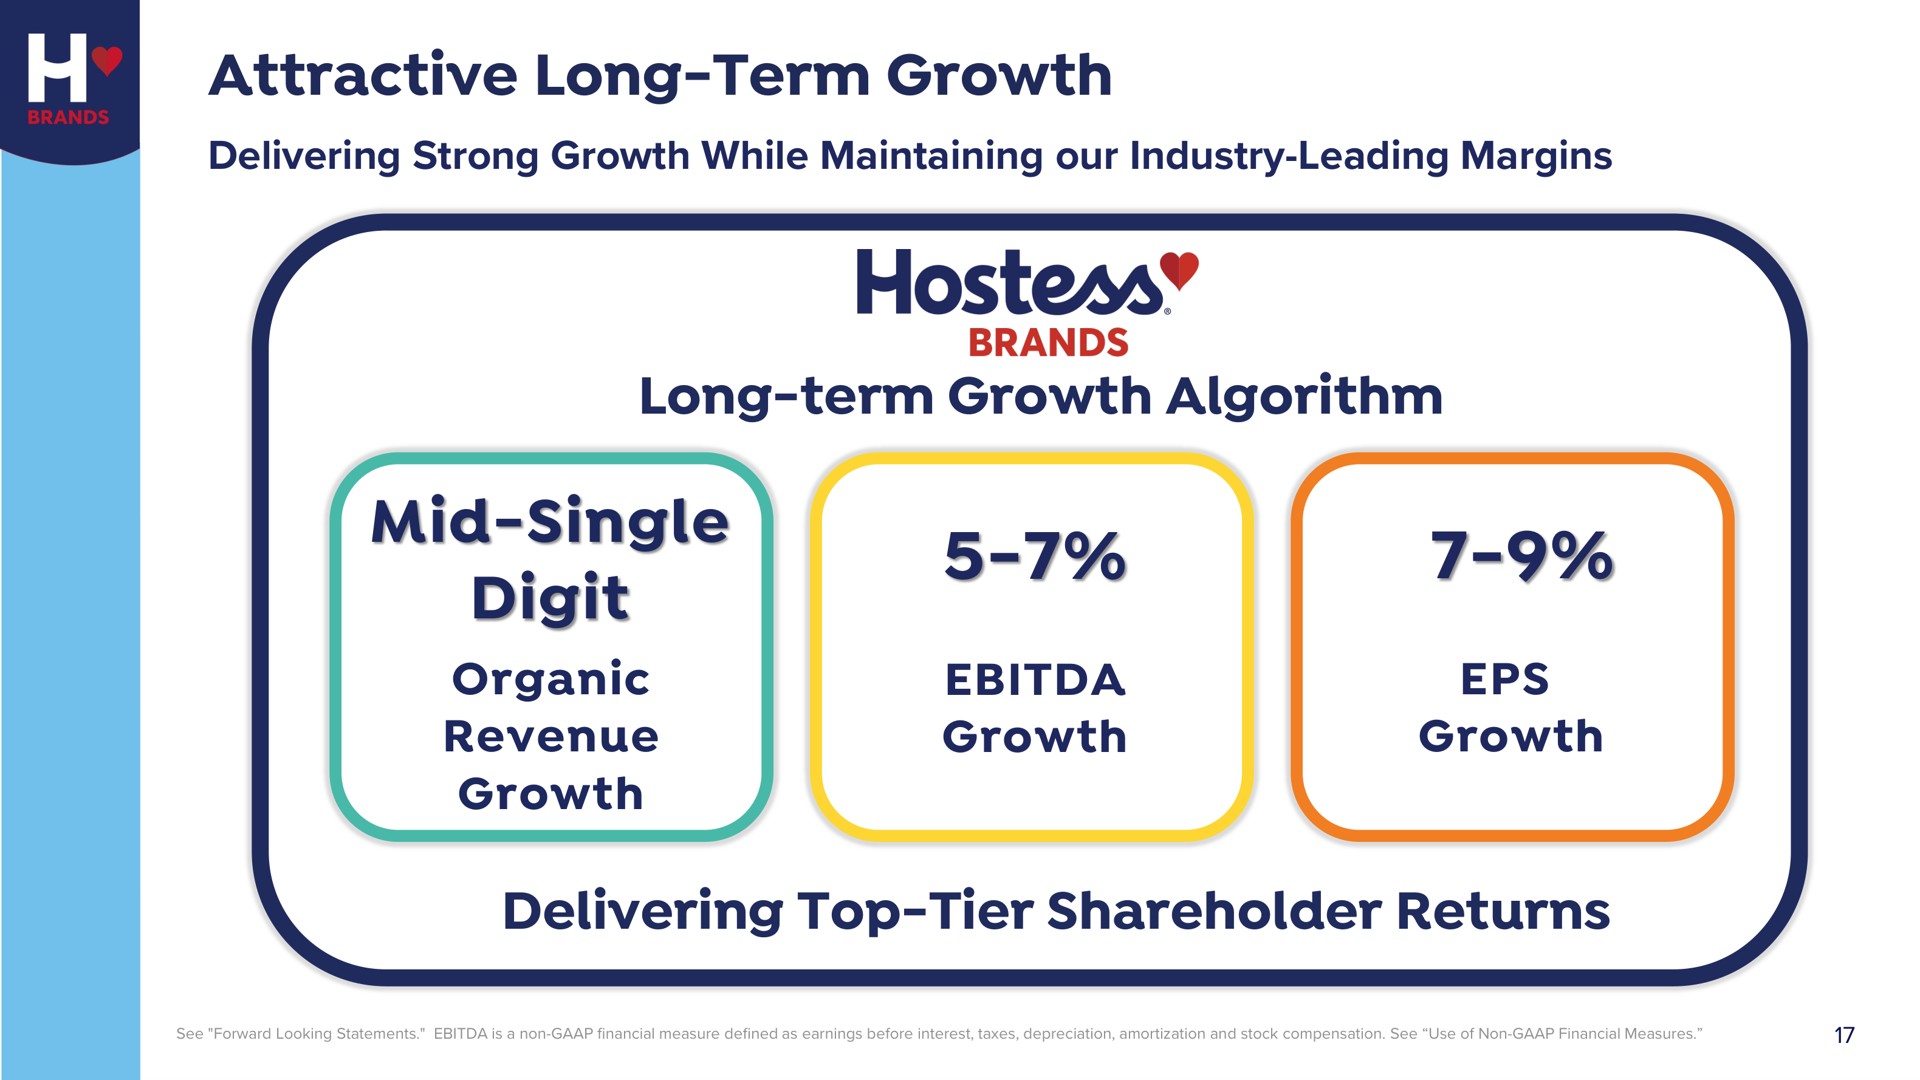 attractive long term growth delivering strong growth while maintaining our industry leading margins long term growth algorithm mid single digit organic revenue growth growth growth delivering top tier shareholder returns brands | Hostess